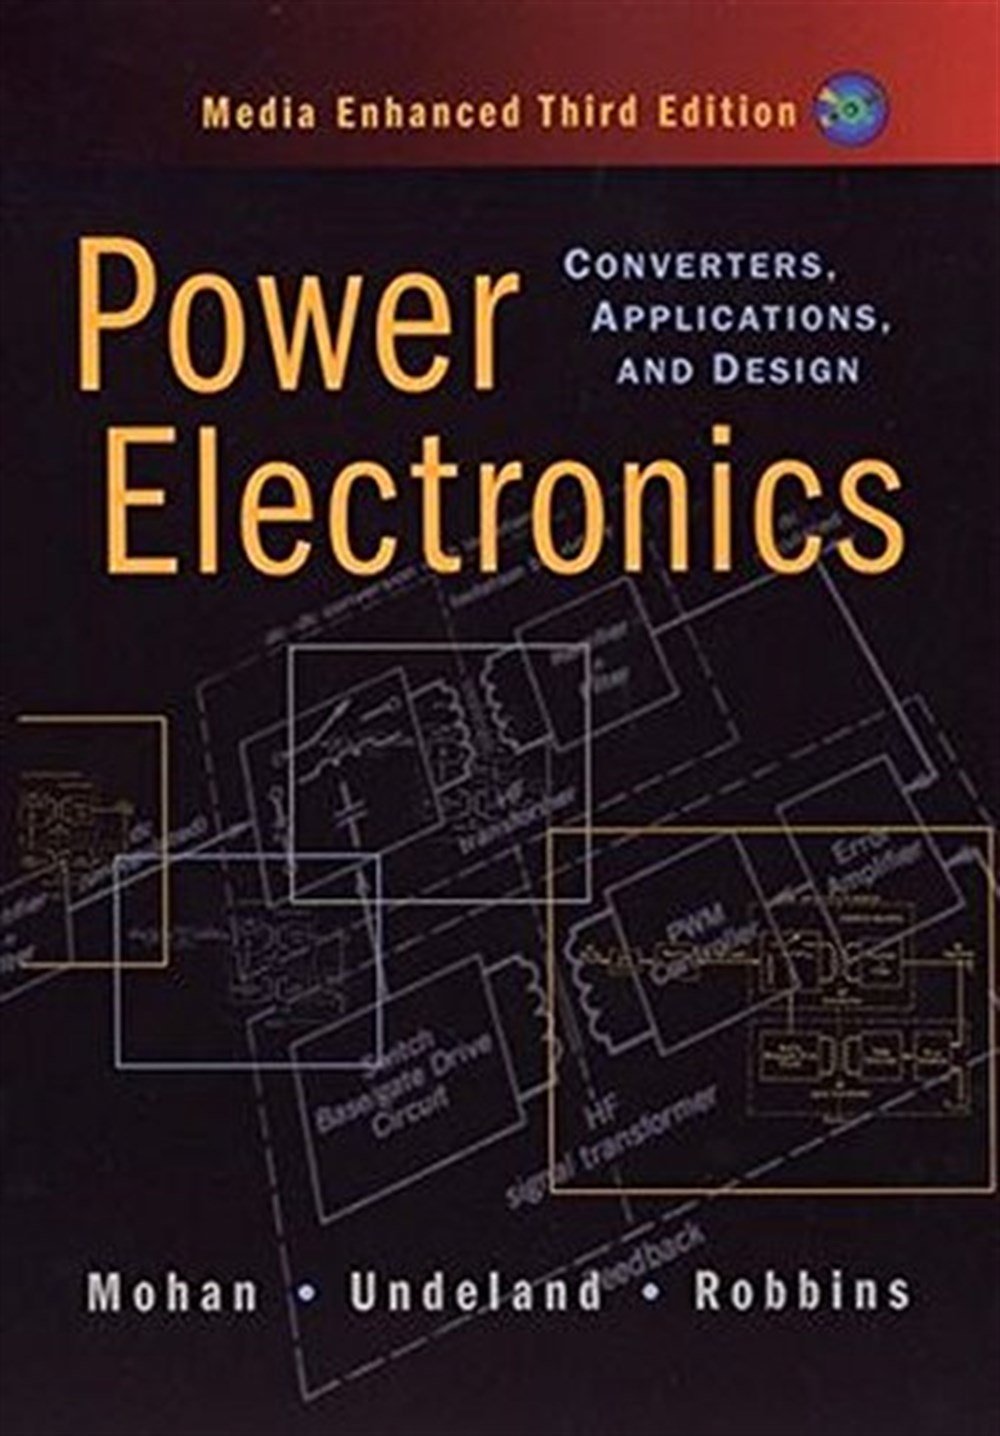 Power Electronics Converters, Applications and Design